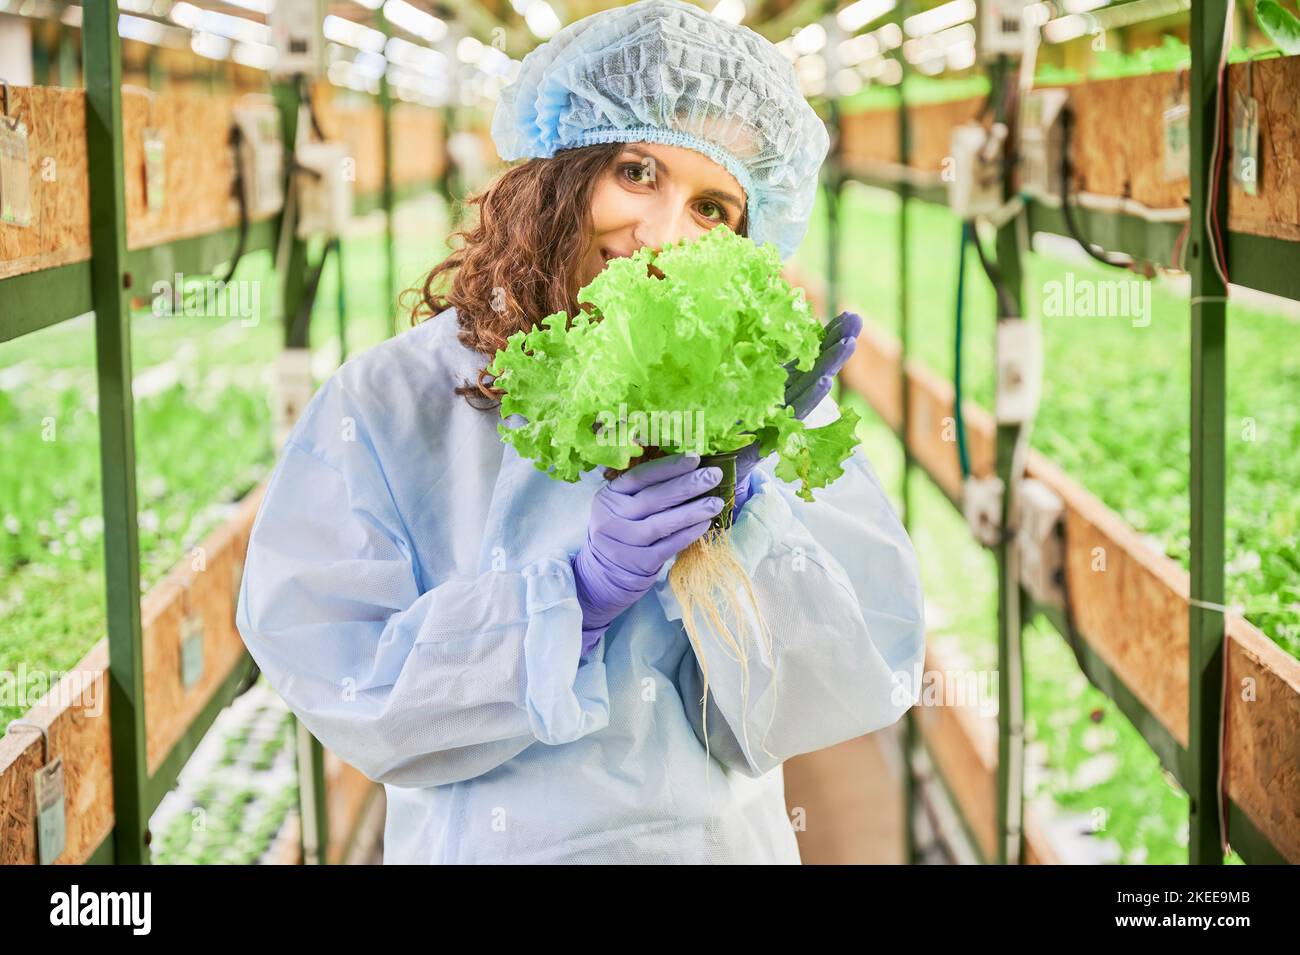 Female gardener smelling green lettuce leaves in greenhouse. Woman in garden rubber gloves holding pot with green plant and enjoying scent of fresh aromatic leaf. Stock Photo